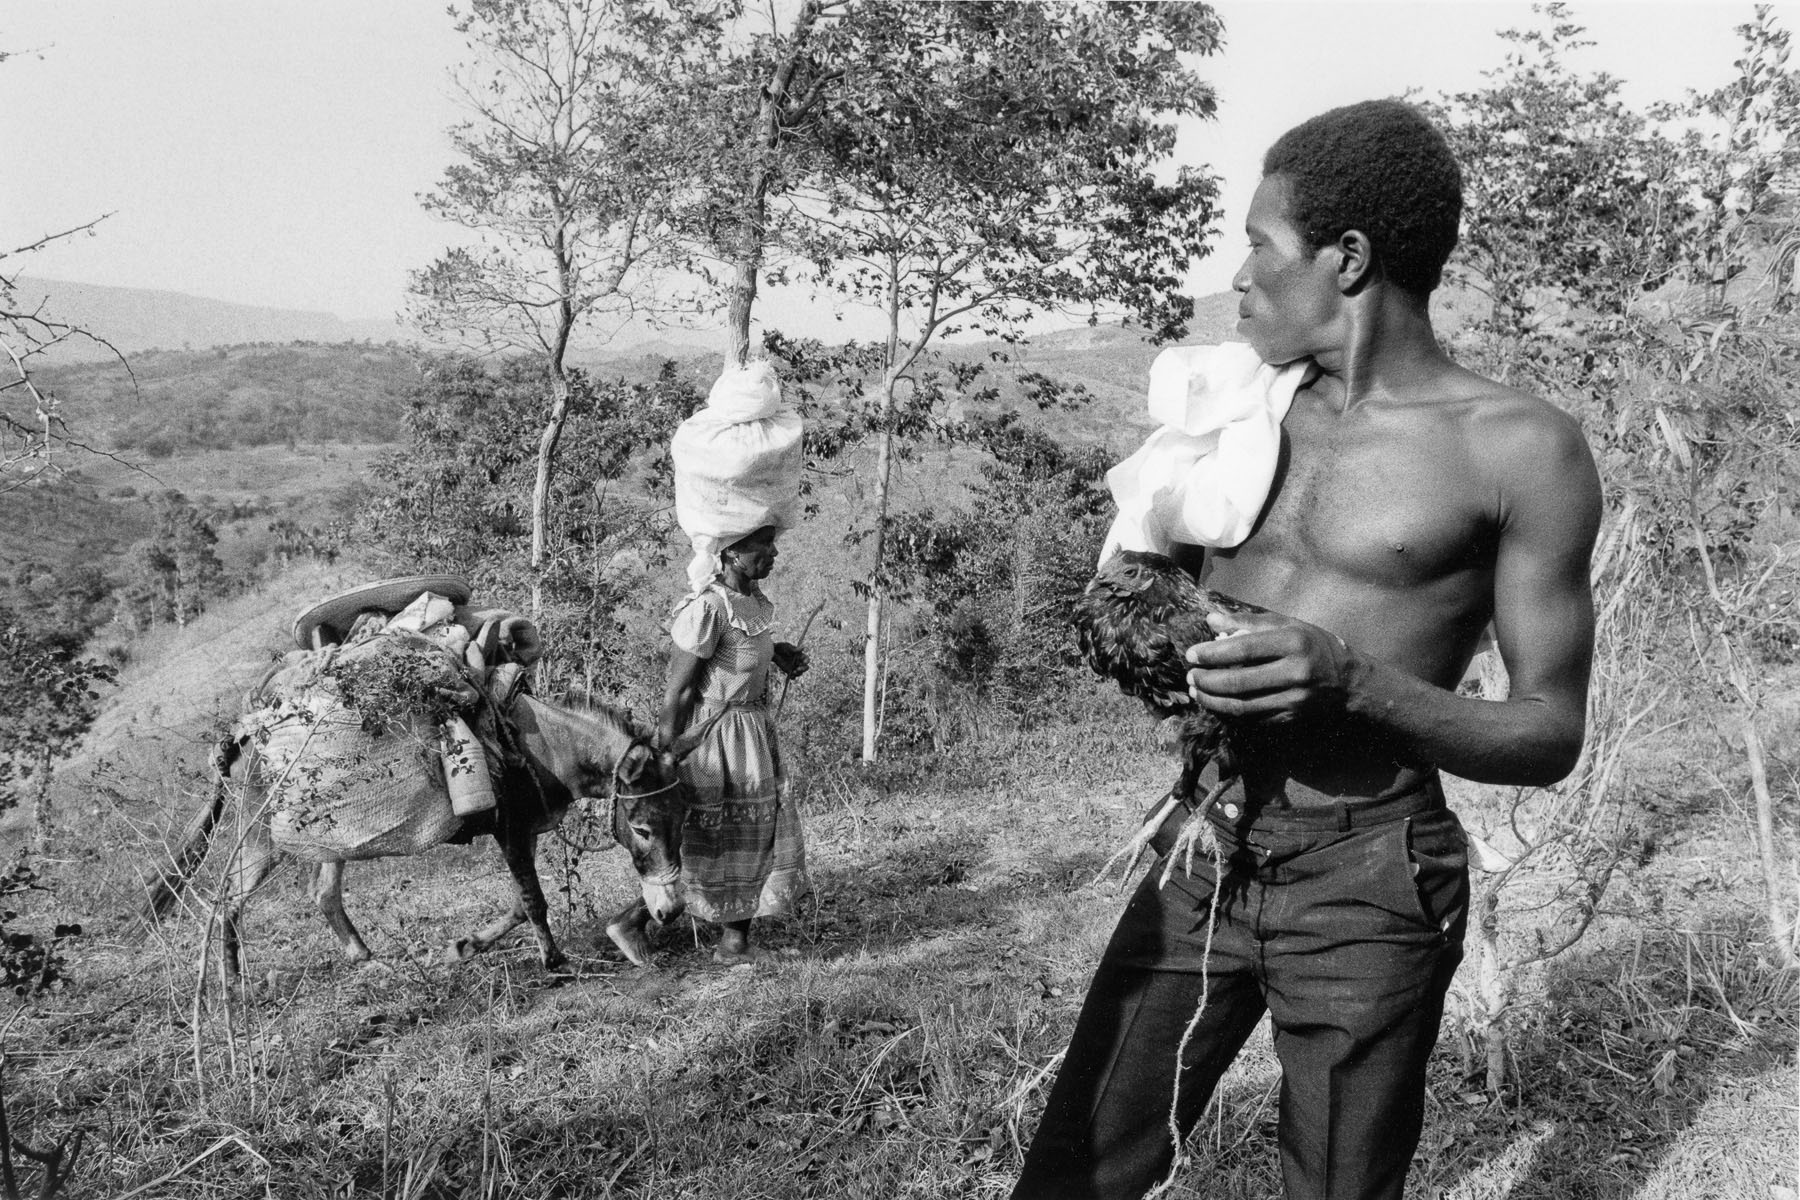 Man carrying a fighting rooster by Jean-Rabel in August 1986